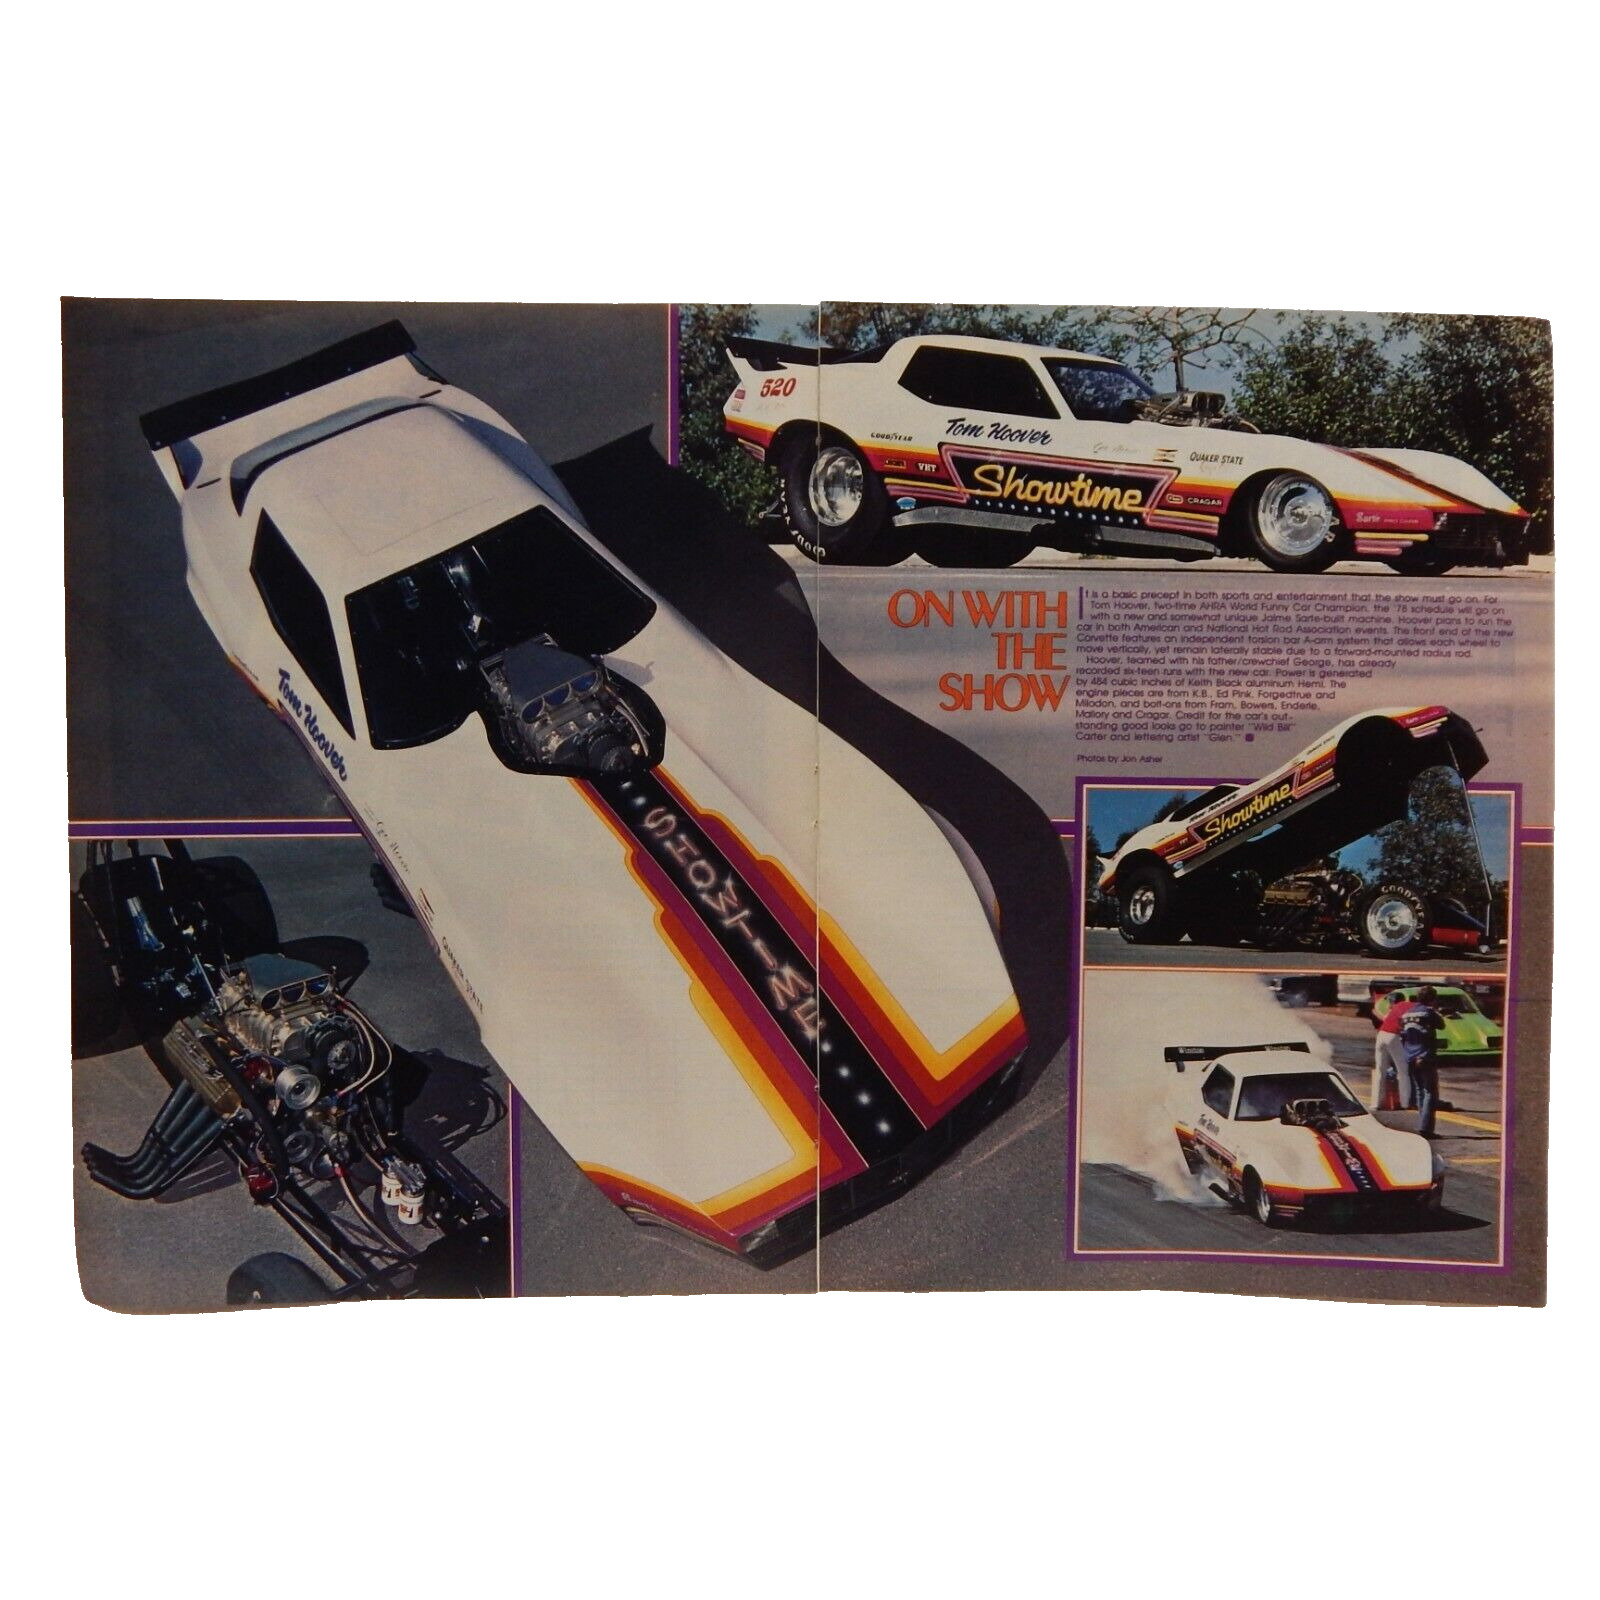 TOM HOOVER SHOWTIME FUNNY CAR 1978 ADVERTISEMENT